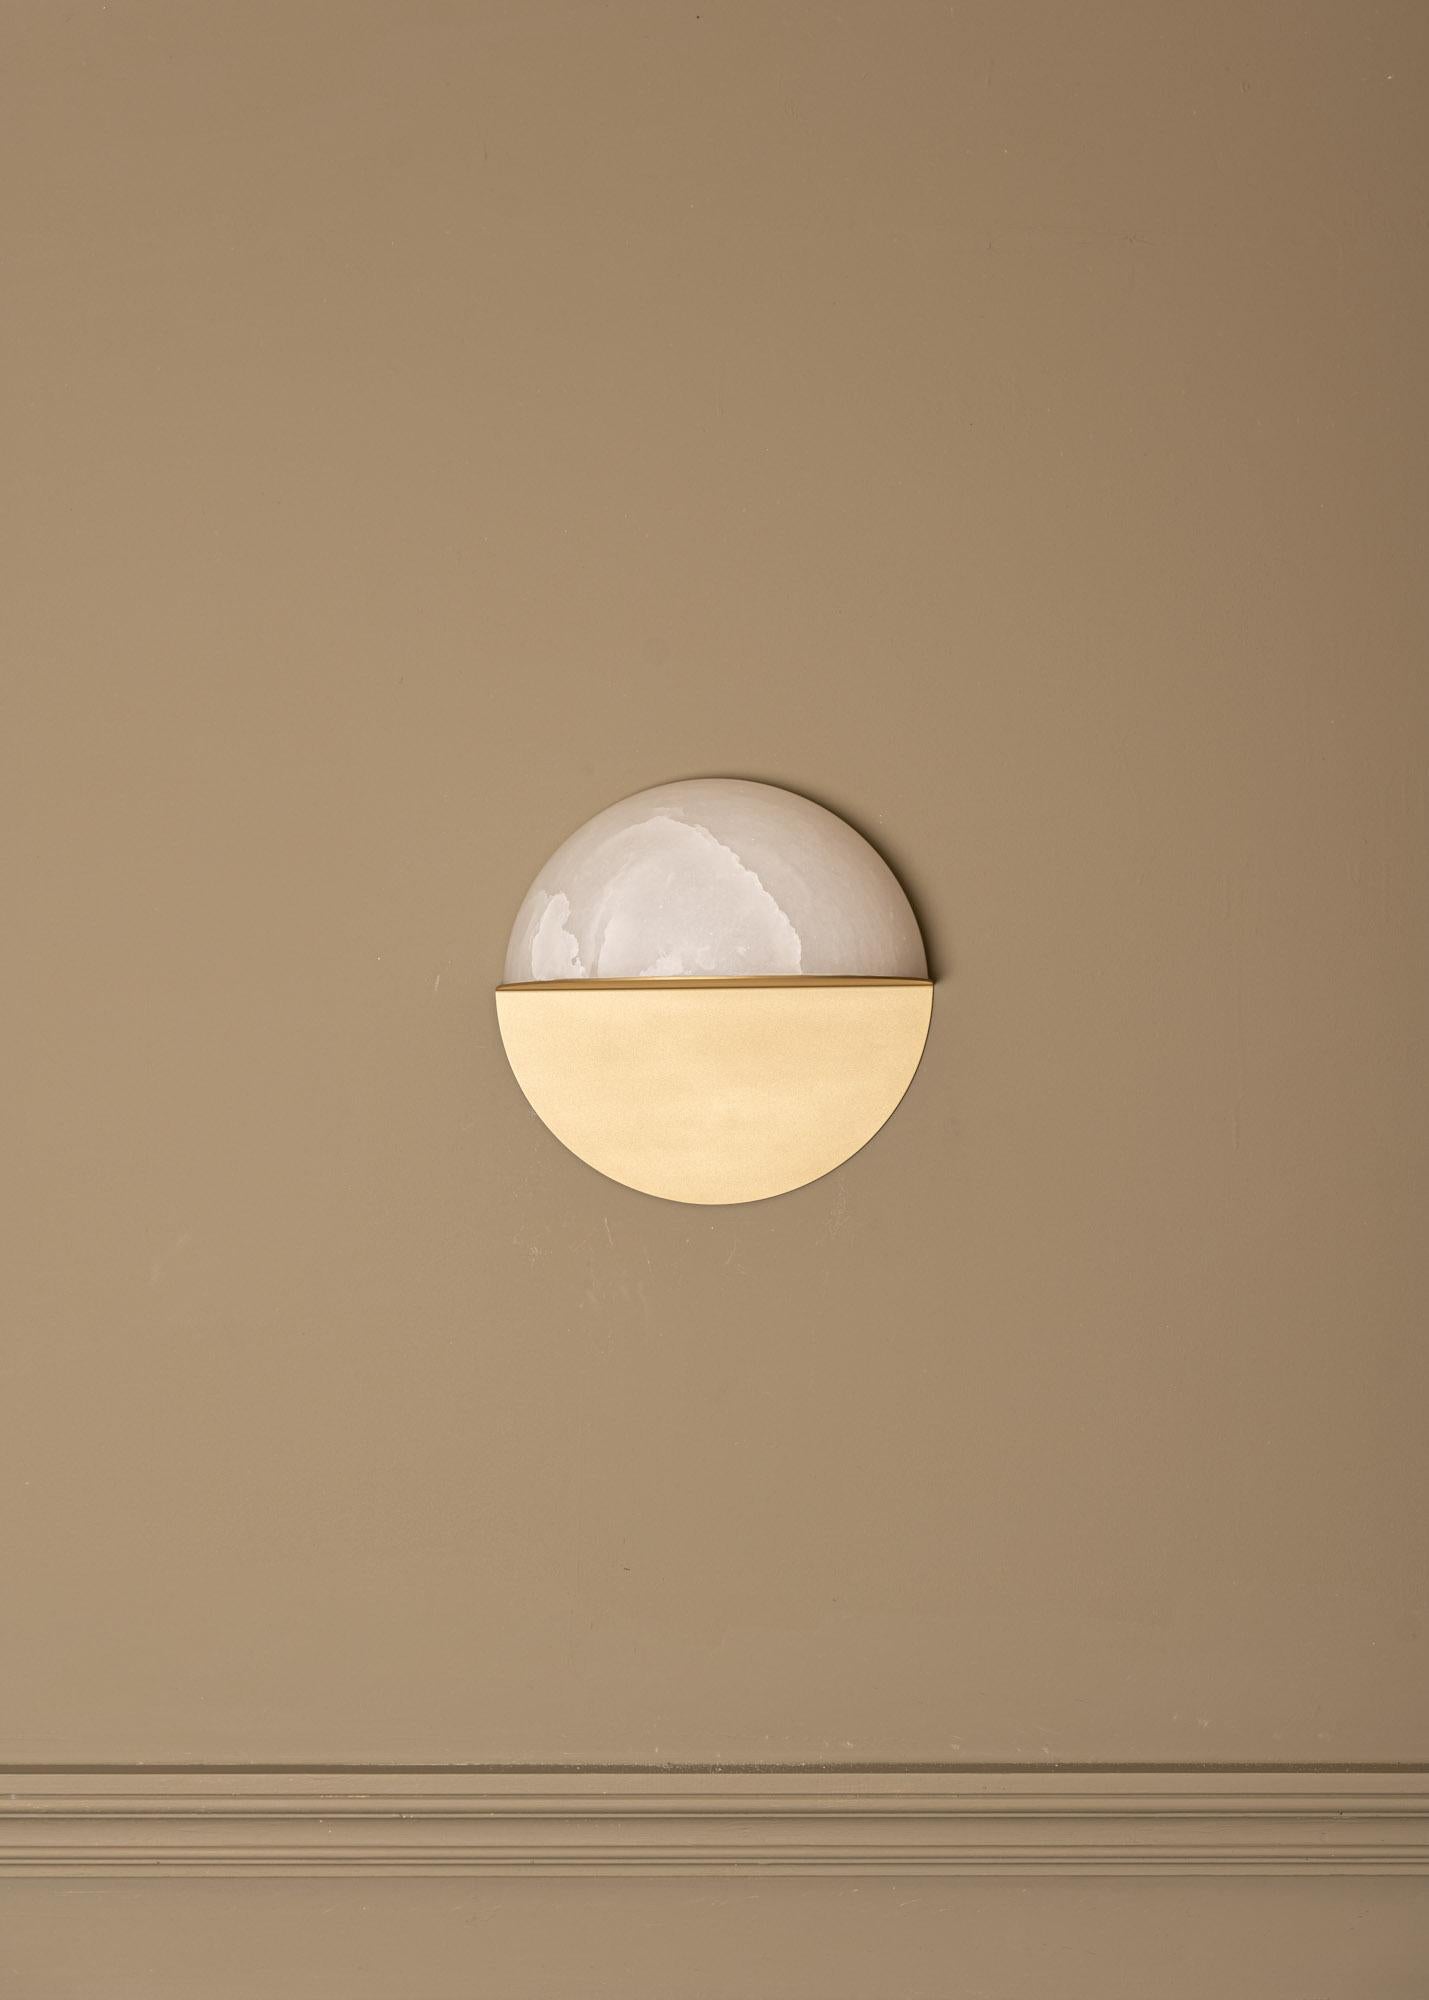 Luno Brass Wall Sconce by Simone & Marcel
Dimensions: D 13 x W 27 x H 27 cm.
Materials: Brass and alabaster.

Available in different brass and alabaster options and finishes. Custom options available on request. Please contact us. 

All our lamps